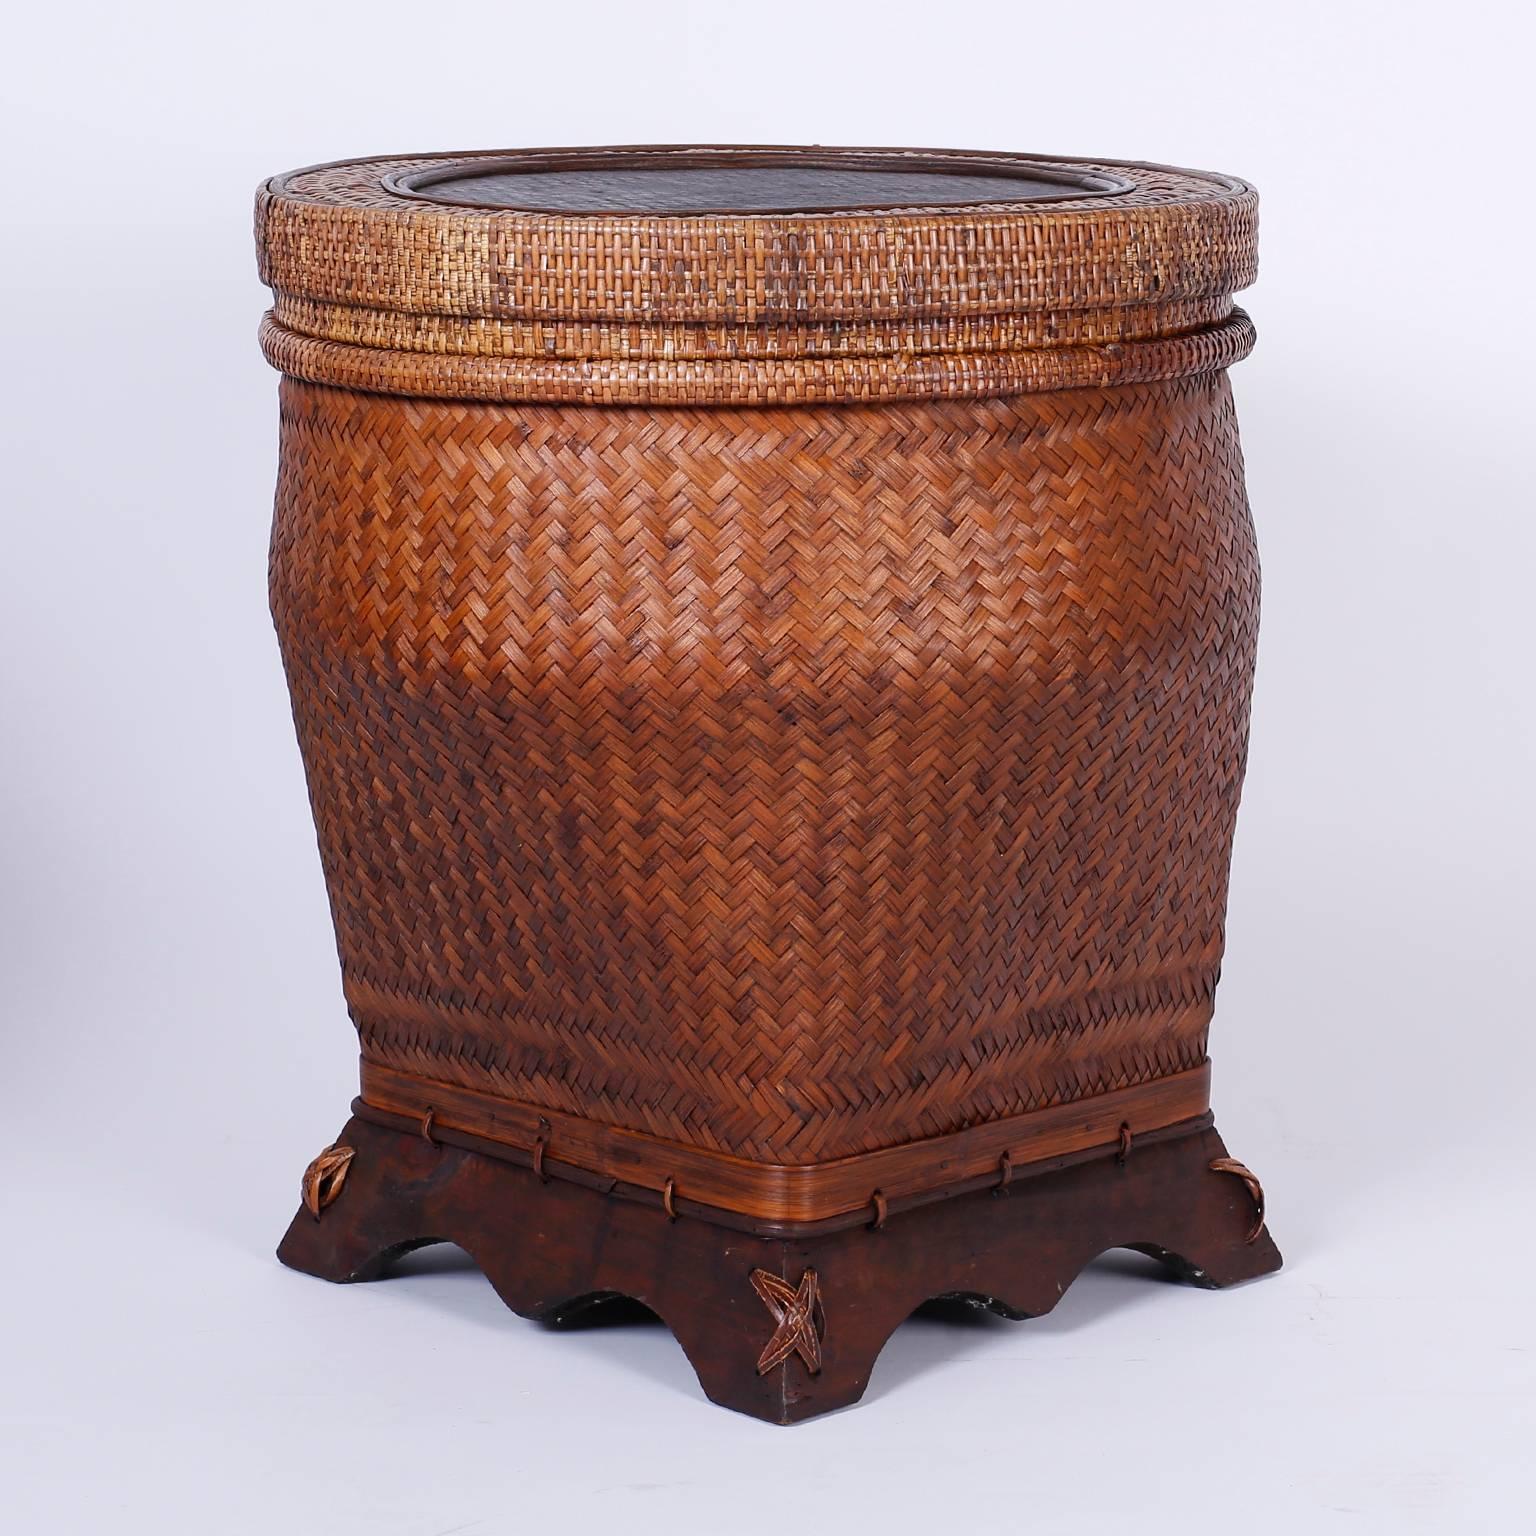 Anglo-Indian Pair of Lidded Rattan Baskets or Tables